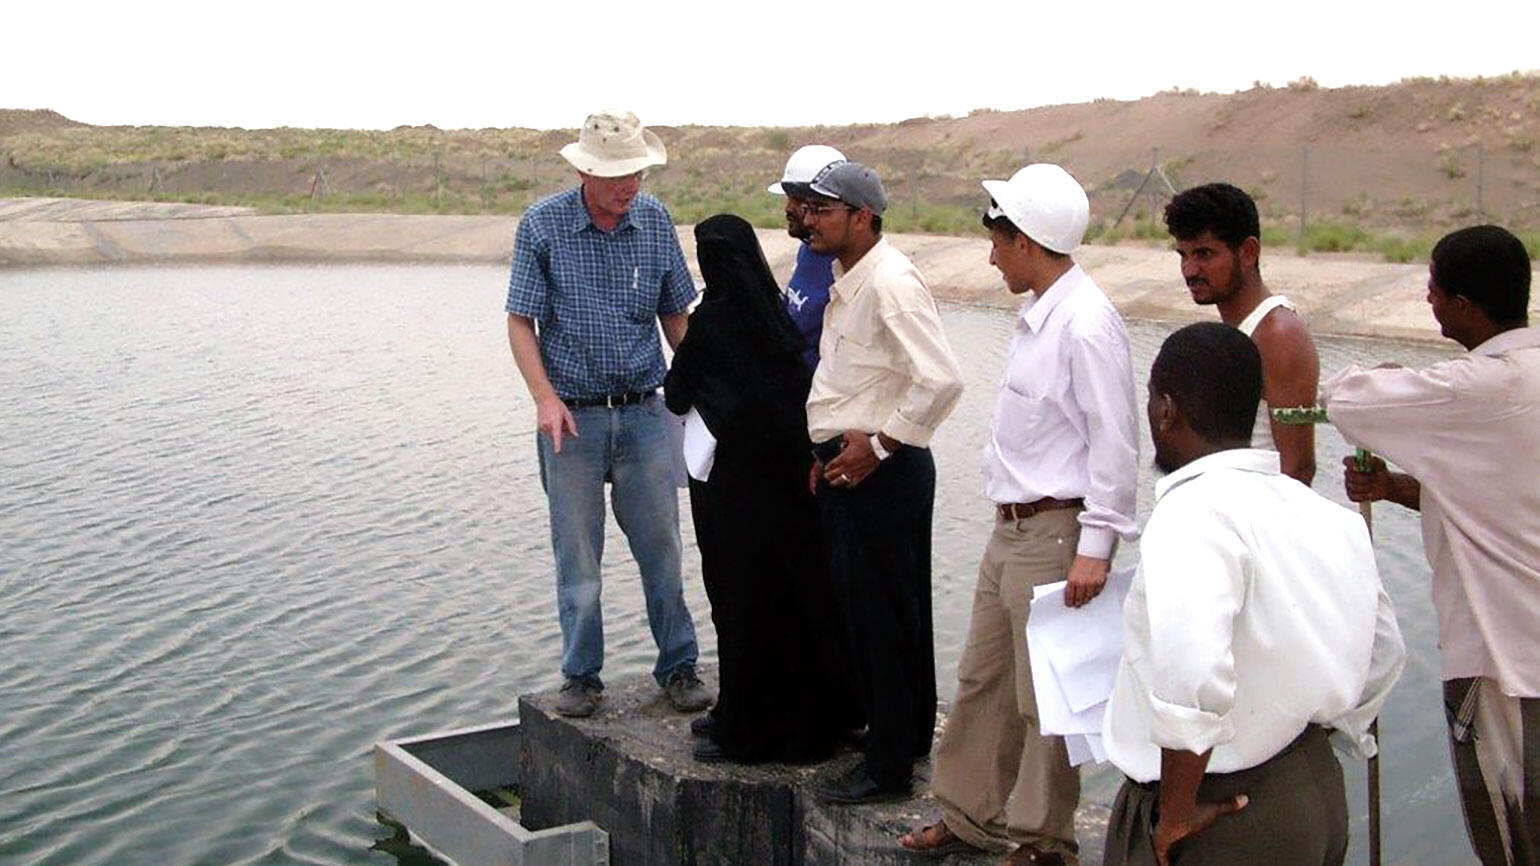 A group of people from the MENA region stands at some water installation listening to a trainer